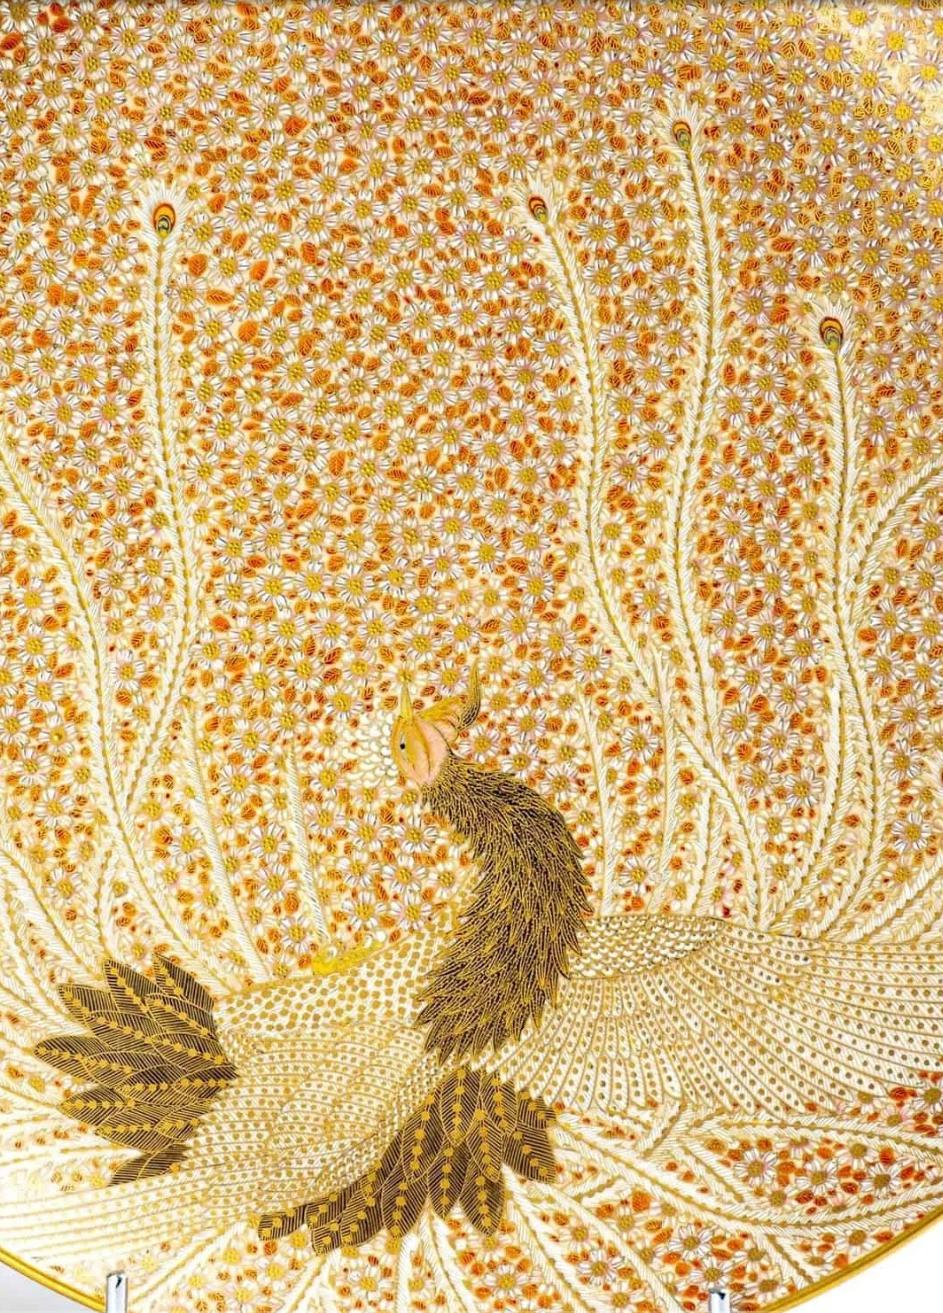 Large ceramic plate from Satsuma depicting a Phoenix 鳳凰 about to take flight with wings spread wide and long feathers fluttering finely decorated with gold and relief glazes.

Signed ‘Satsuma-yaki Shōzan ga’ 薩摩焼 祥山画 (Satsuma ware, painted by